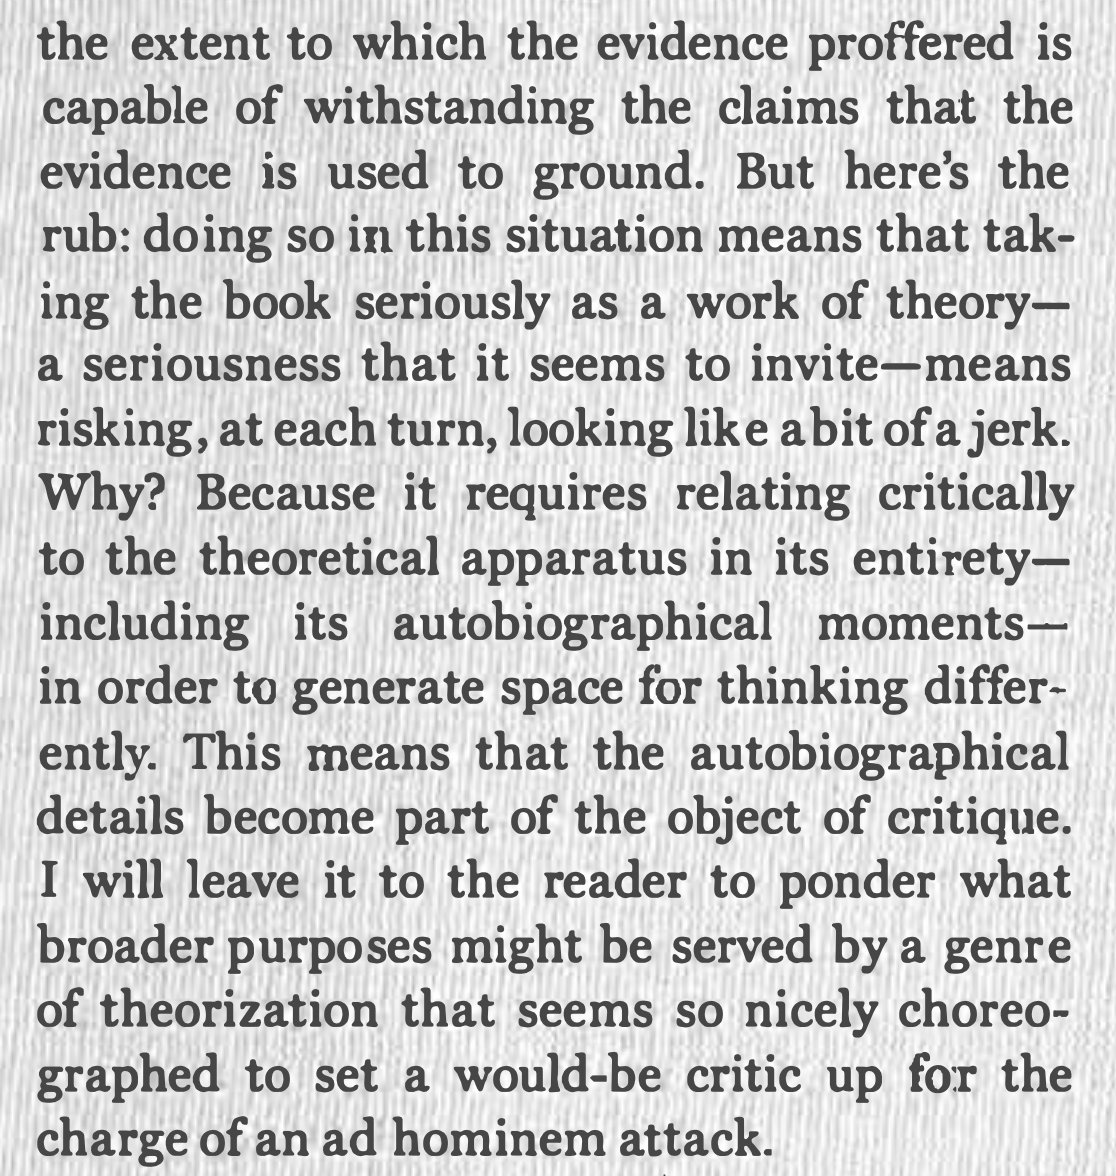 First, all important observations on the methodological constraints of afropessimism, especially in Wilderson's most recent book. Insofar as the work is autobiographical, standard practices of critical scrutiny are discouraged––but still necessary to assess its theoretical merits